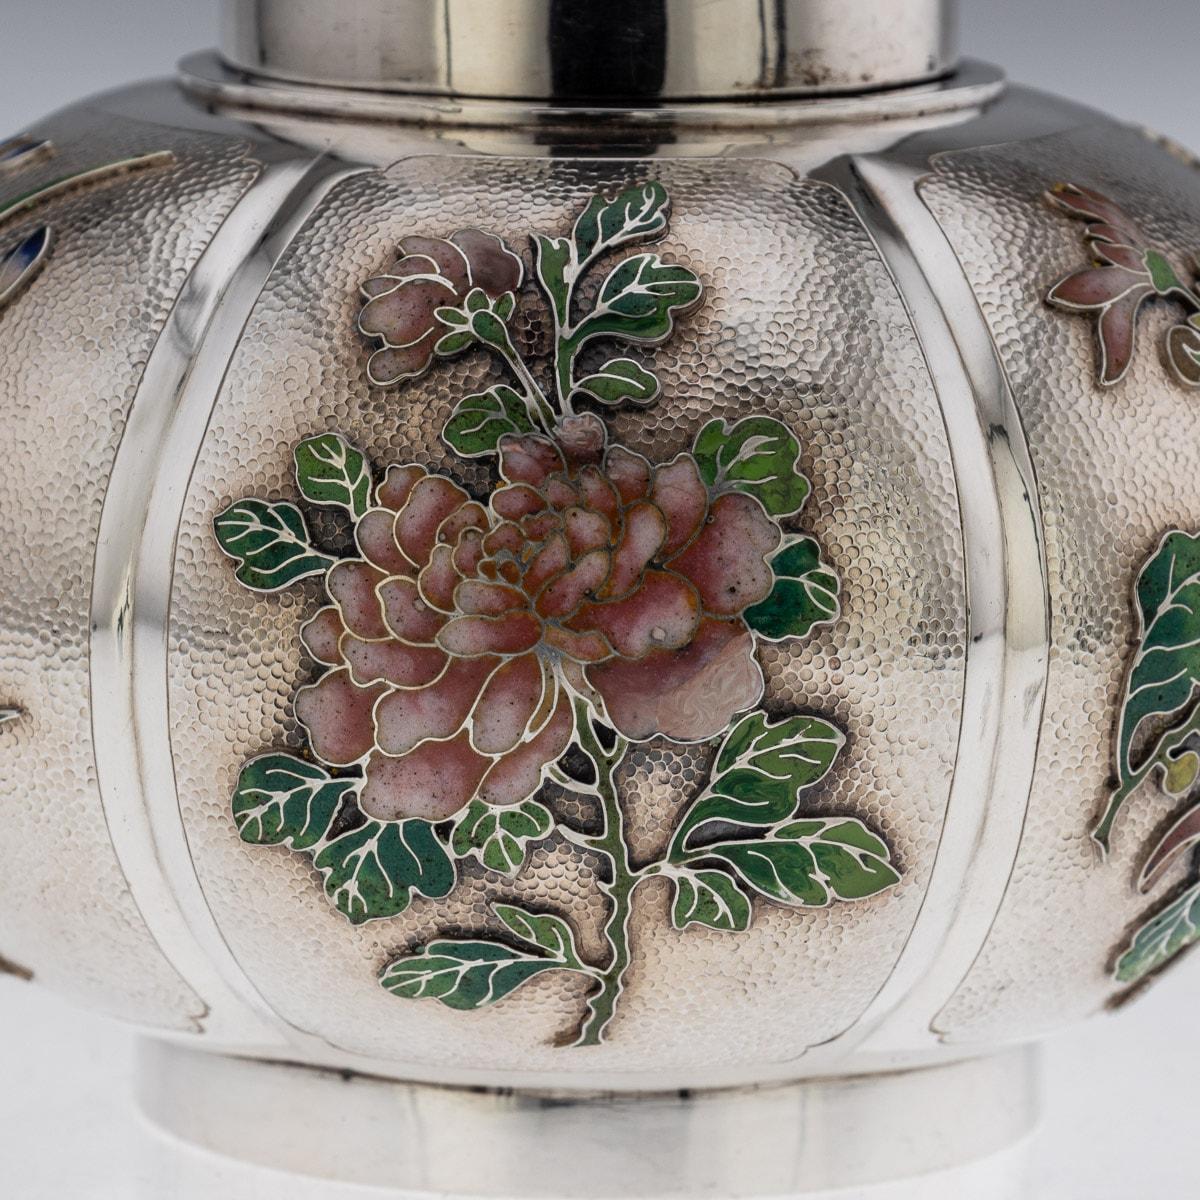 20th Century Chinese Export Solid Silver & Enamel Tea Caddy, Luen Wo, c.1900 8